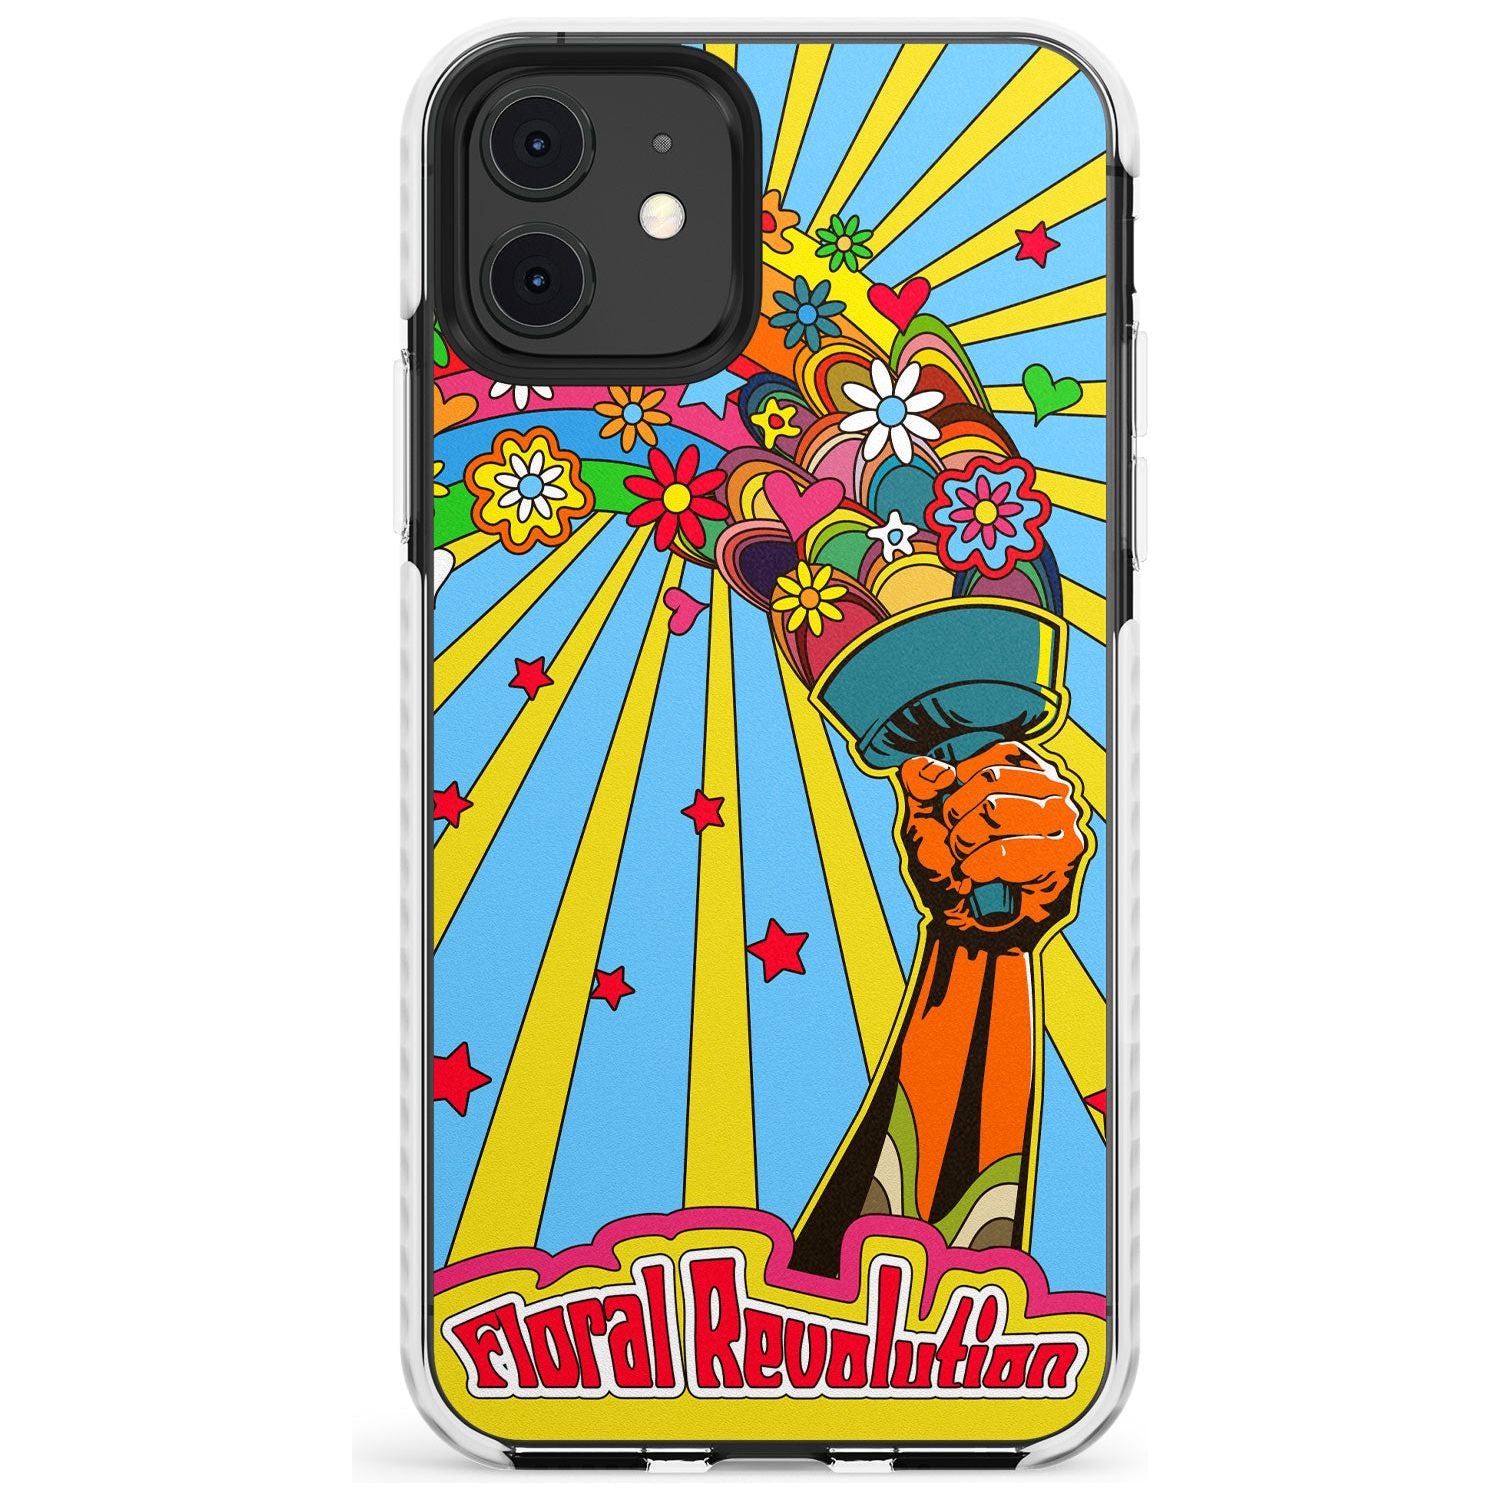 Floral Revolution Slim TPU Phone Case for iPhone 11